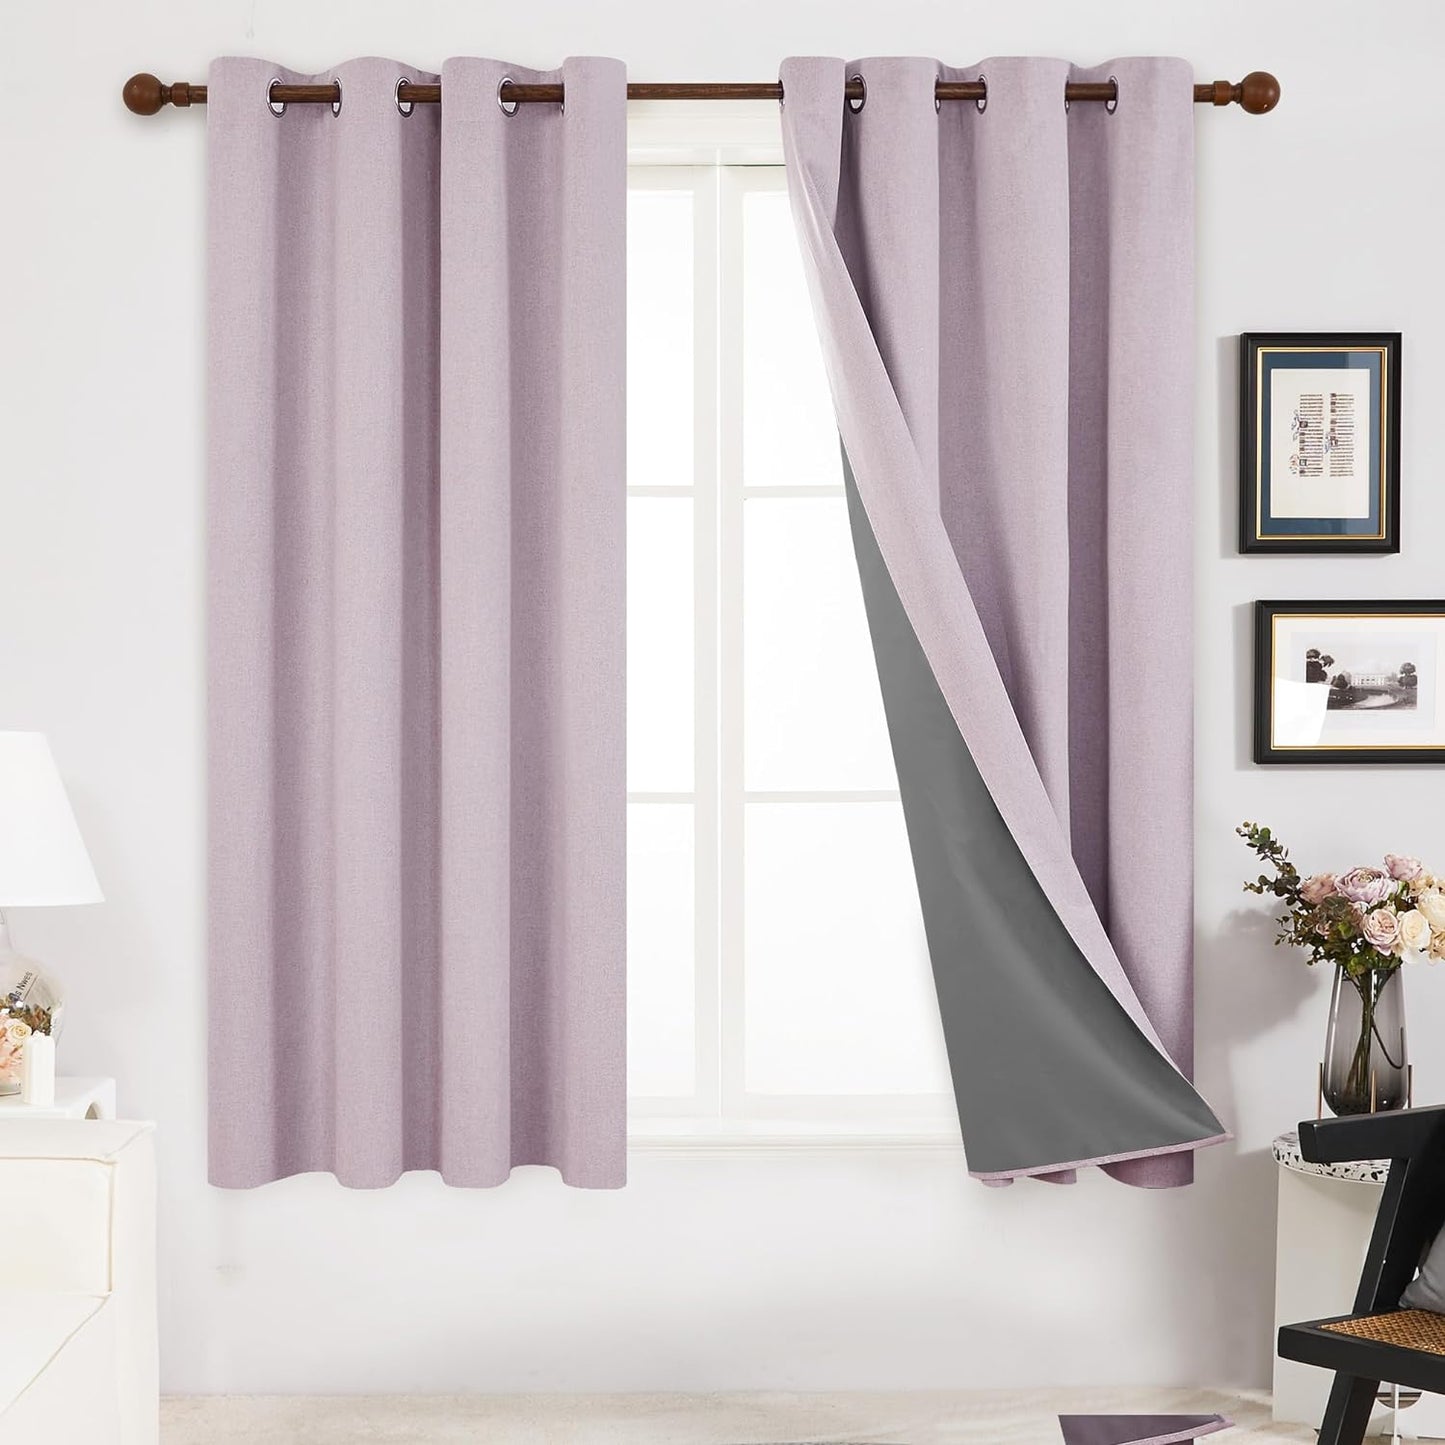 Deconovo Linen Blackout Curtains 84 Inch Length Set of 2, Thermal Curtain Drapes with Grey Coating, Total Light Blocking Waterproof Curtains for Indoor/Outdoor (Light Grey, 52W X 84L Inch)  Deconovo Lilac 52X45 Inches 